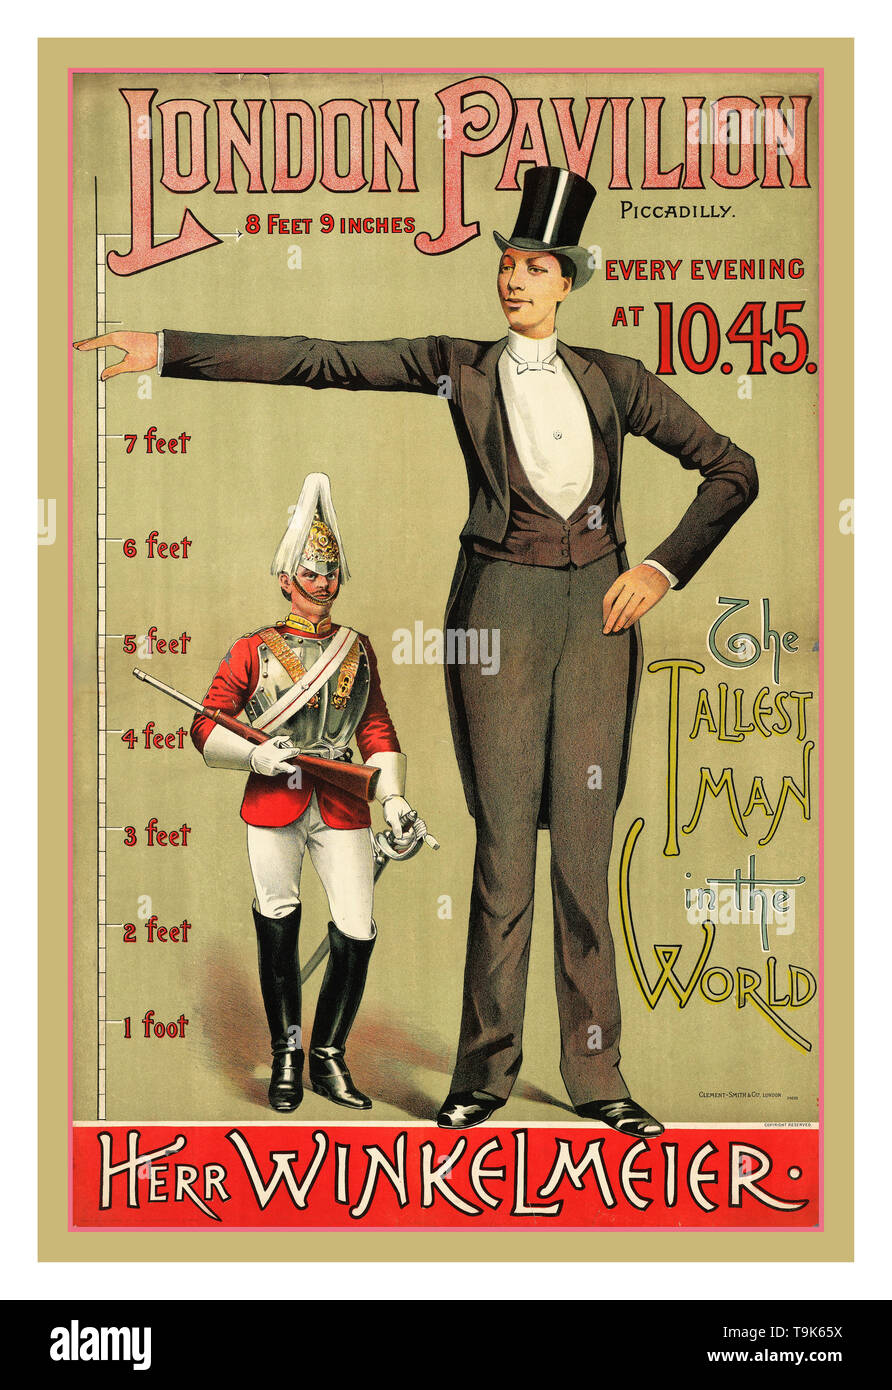 Giant 'Freak' Show Poster 1880's entertainment.  London Pavilion, Piccadilly London every evening at 10.45  'The tallest man in the world' : 'Herr Winkelmeier'. Giant Freak Show Poster advertising the appearance of Herr Winkelmeier (who was 8 feet 9 inches tall) in a variety show organised by Mr. E. Villiers at the London Pavilion in Piccadilly in 1885. Born on 27 April 1860 in Lengau, Austria, Winkelmeier was advertised as the tallest man who ever existed. He toured Europe, having previously 'created... a sensation at the Folies Bergeres, Paris' and was introduced to Queen Victoria in 18 Stock Photo